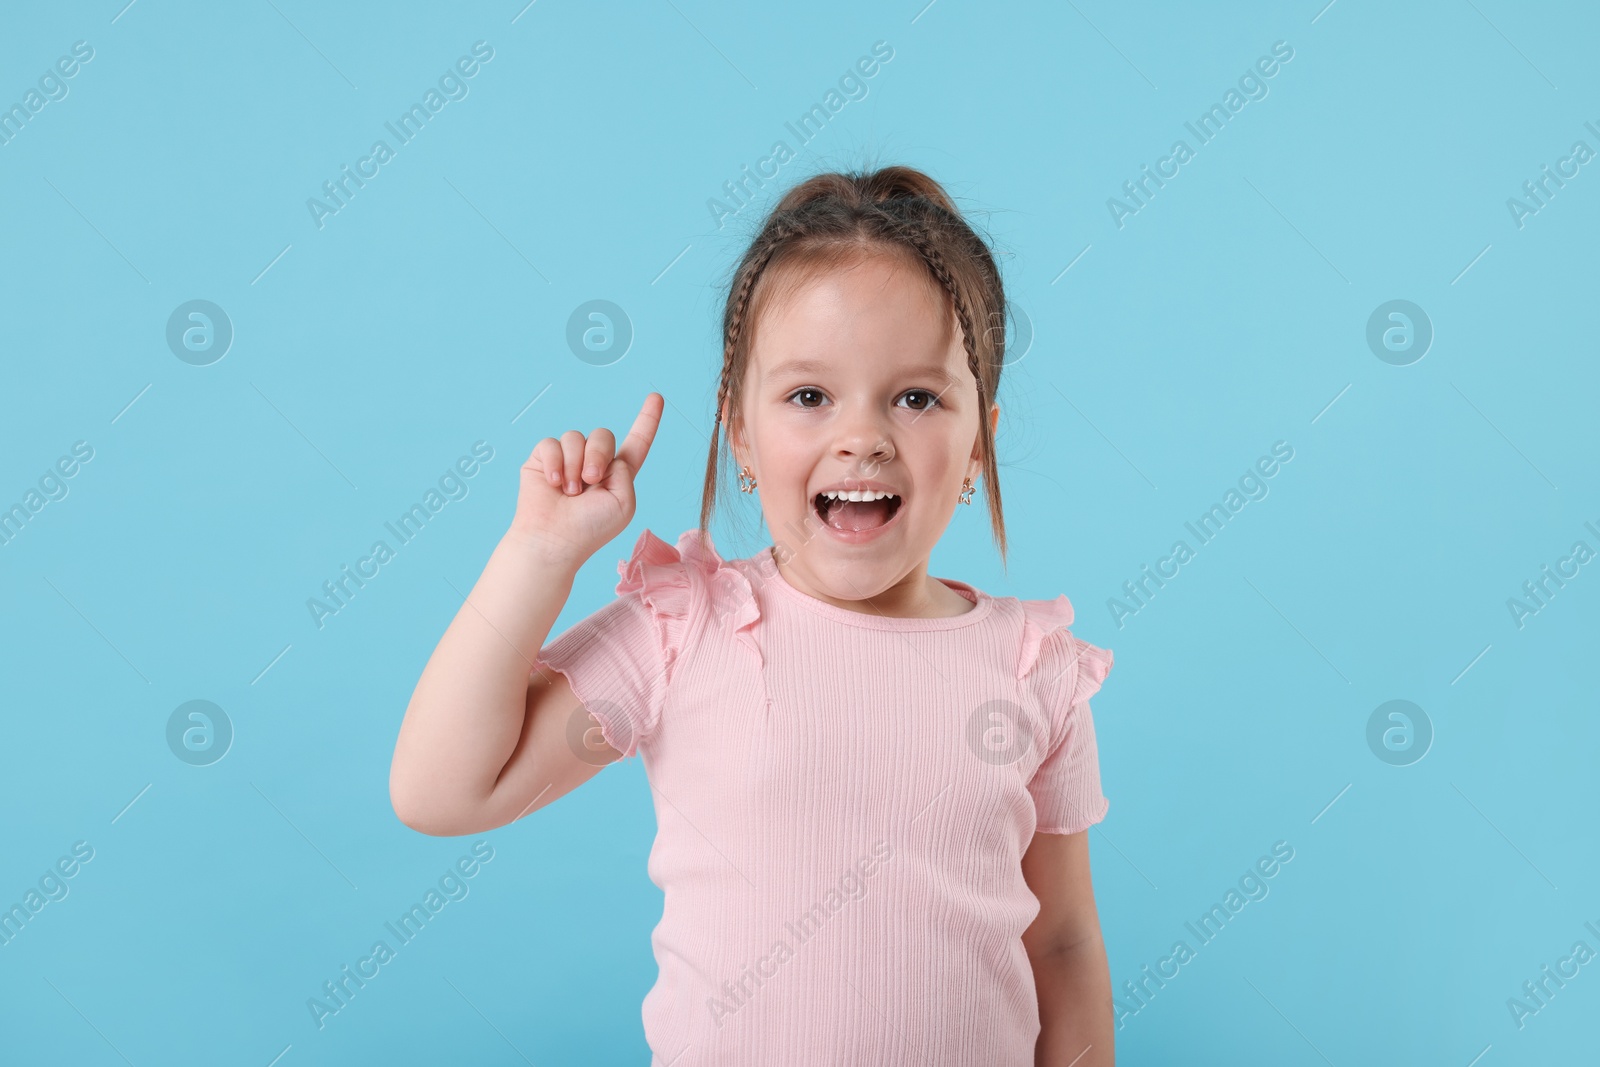 Photo of Cute little girl pointing at something on light blue background